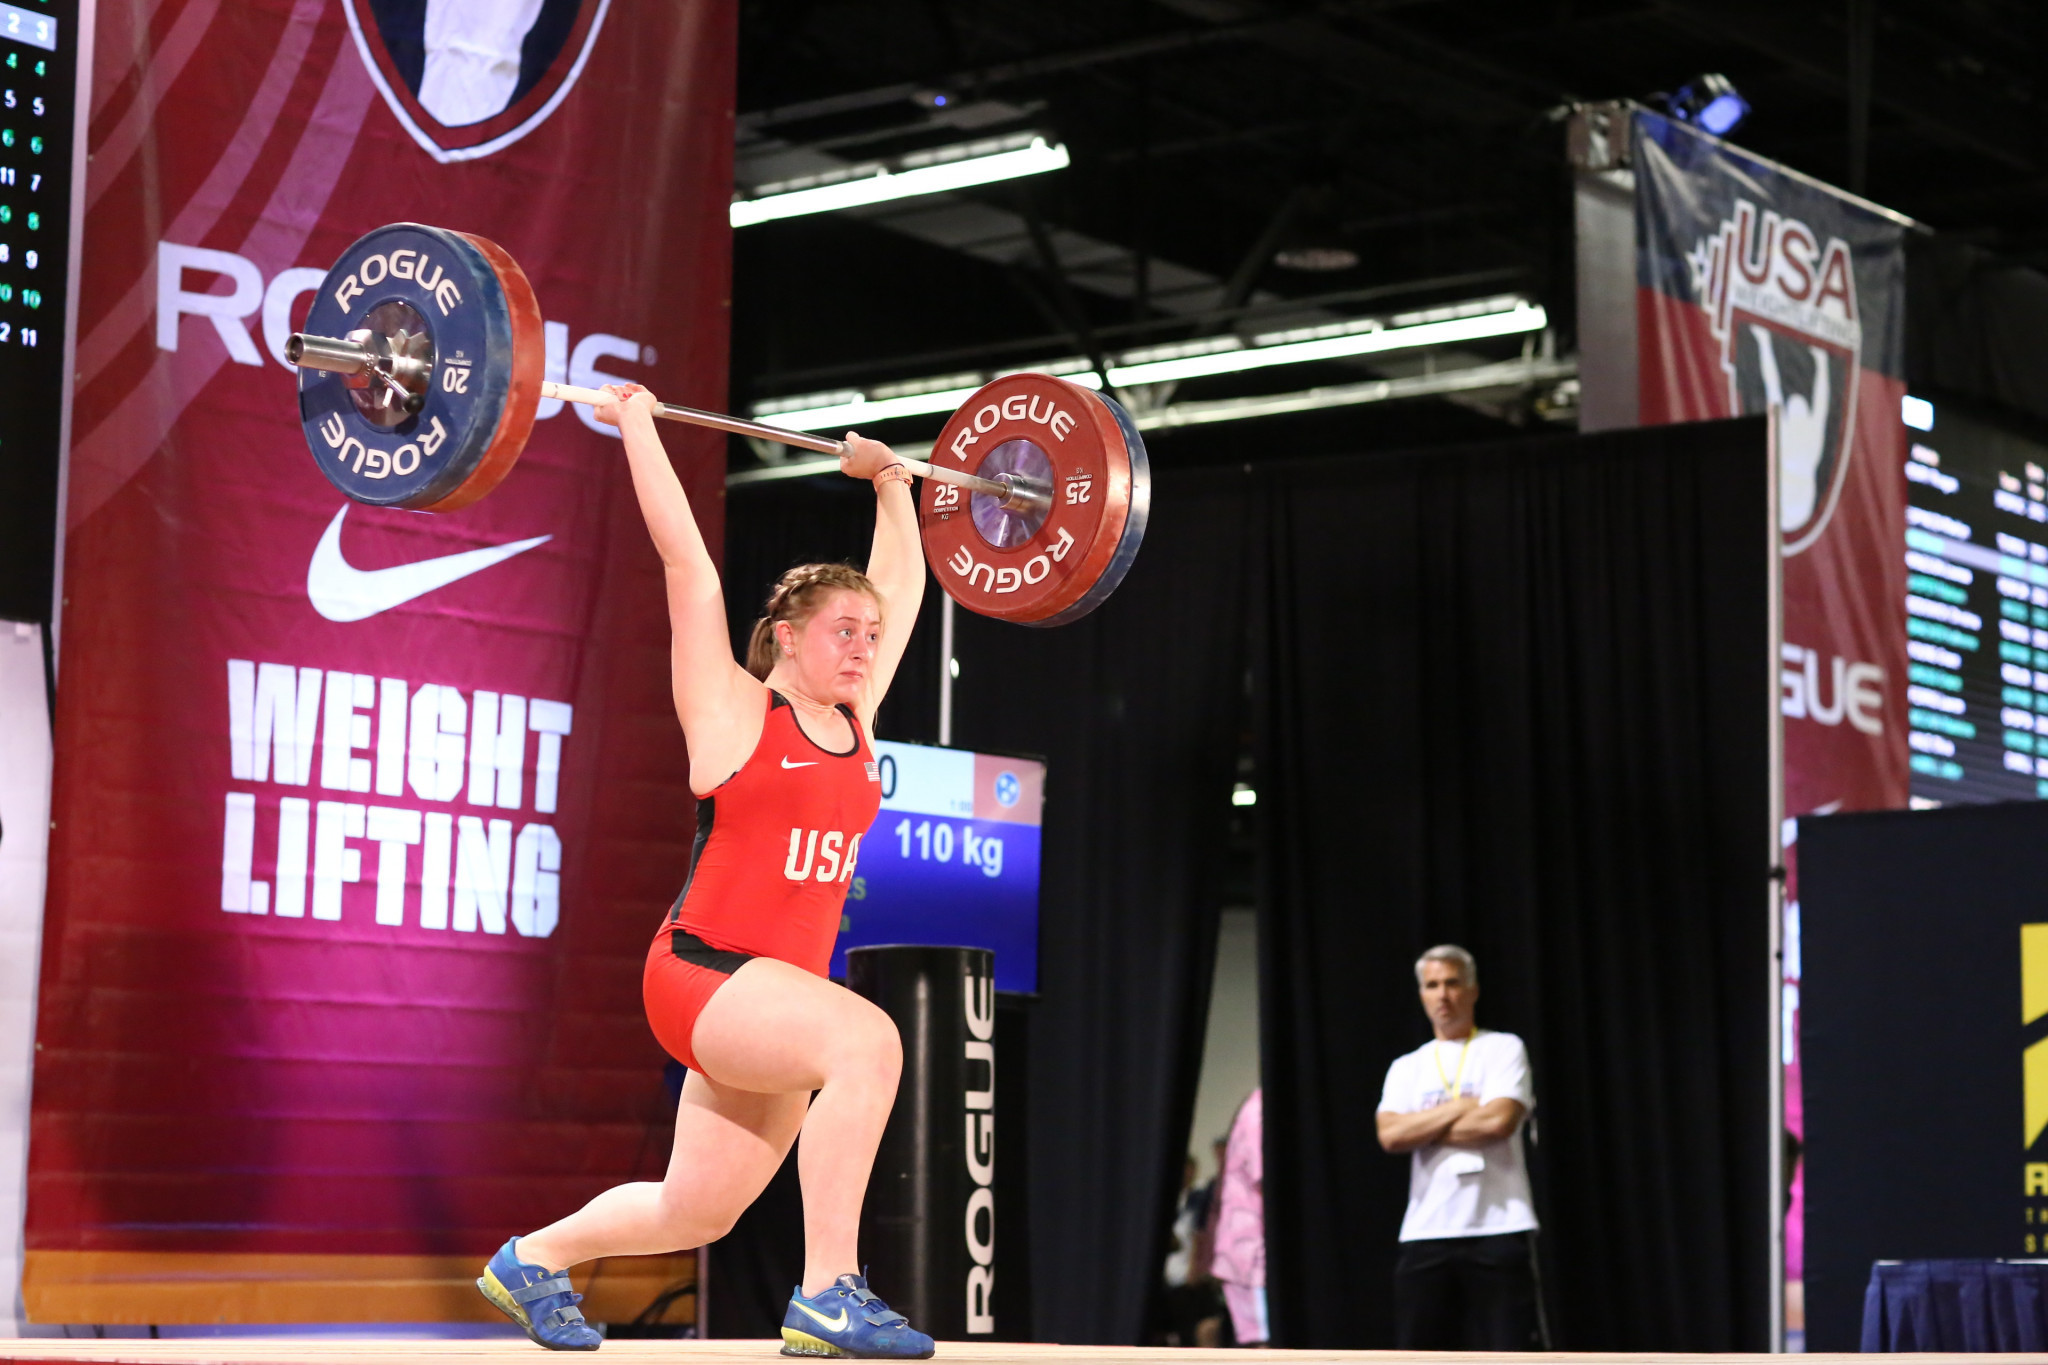 American teenager Reeves takes weightlifting world title to keep run going